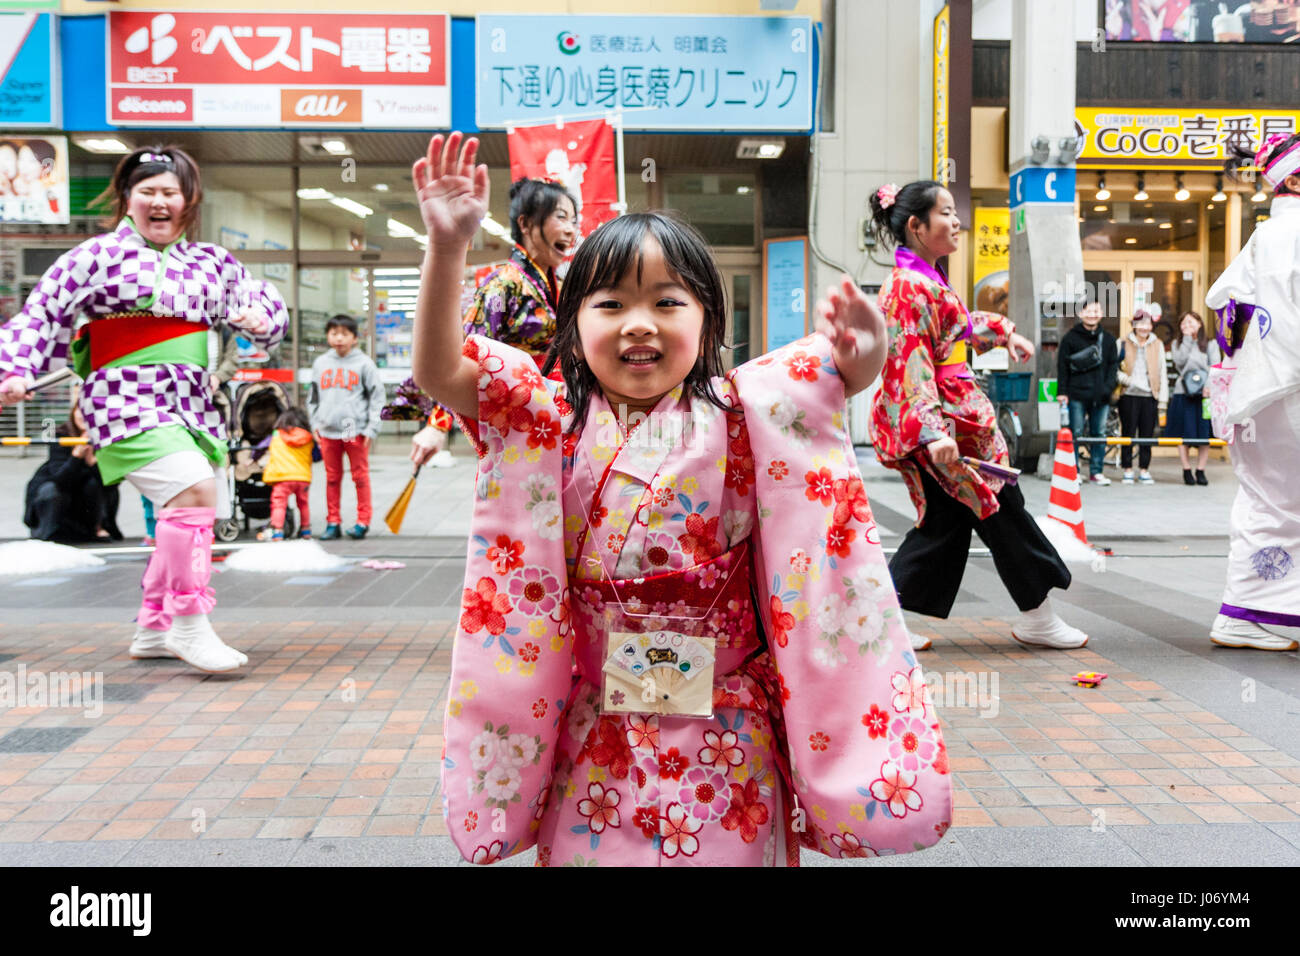 Japan, Kumamoto, Yosakoi dance festival. Close-up. Little smiling girl in pink kimono dancing in shopping mall with dance team behind her. Eye-contact Stock Photo